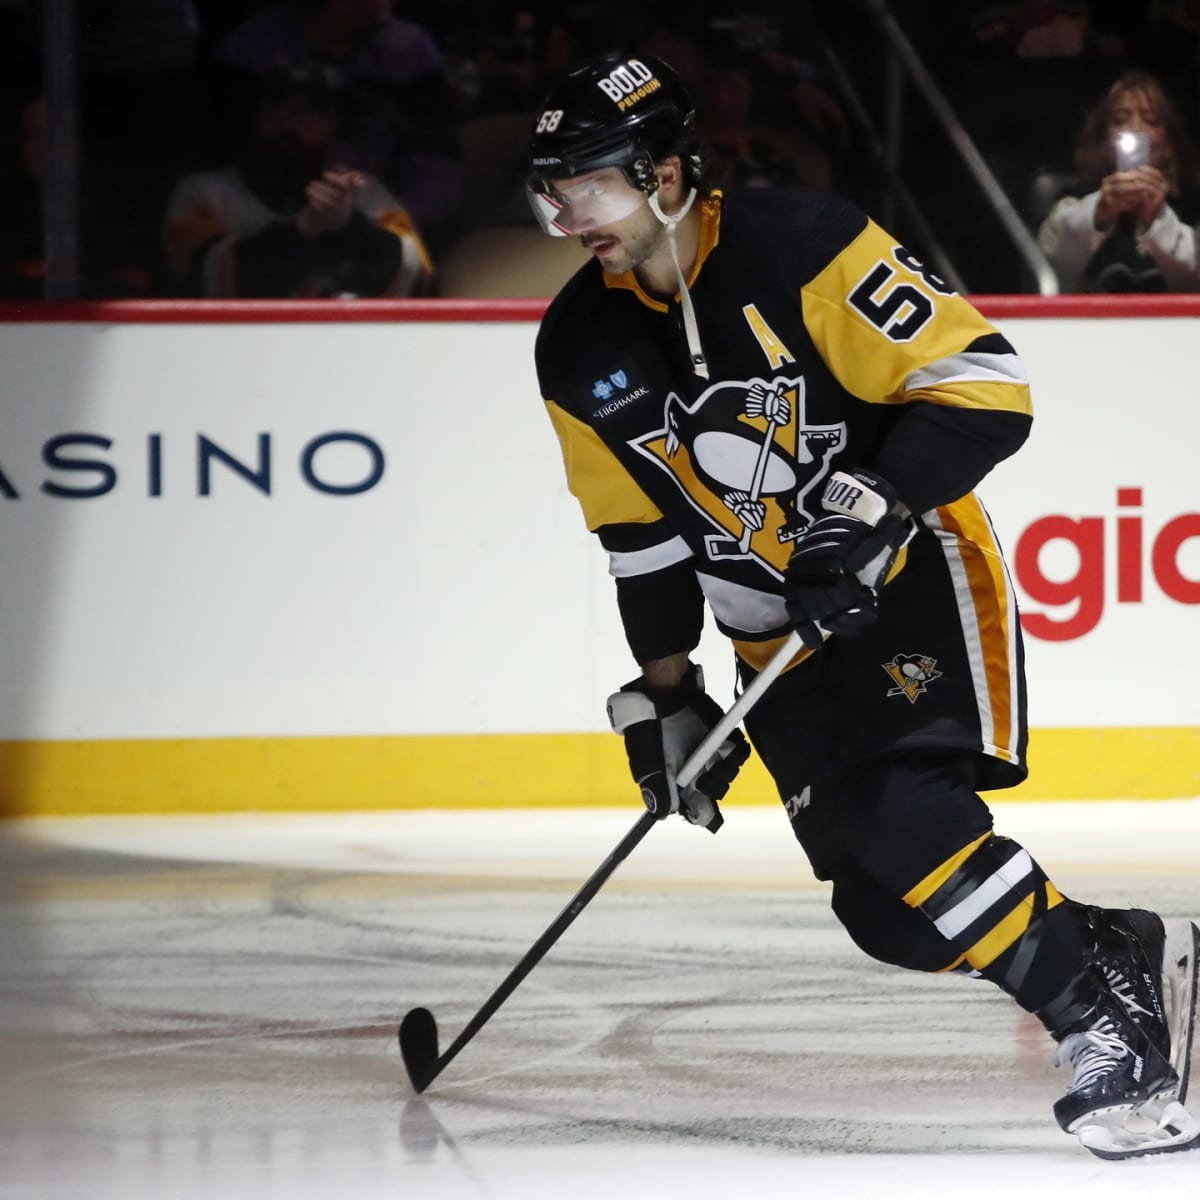 NHL: Kris Letang back in practice, 10 days after suffering stroke